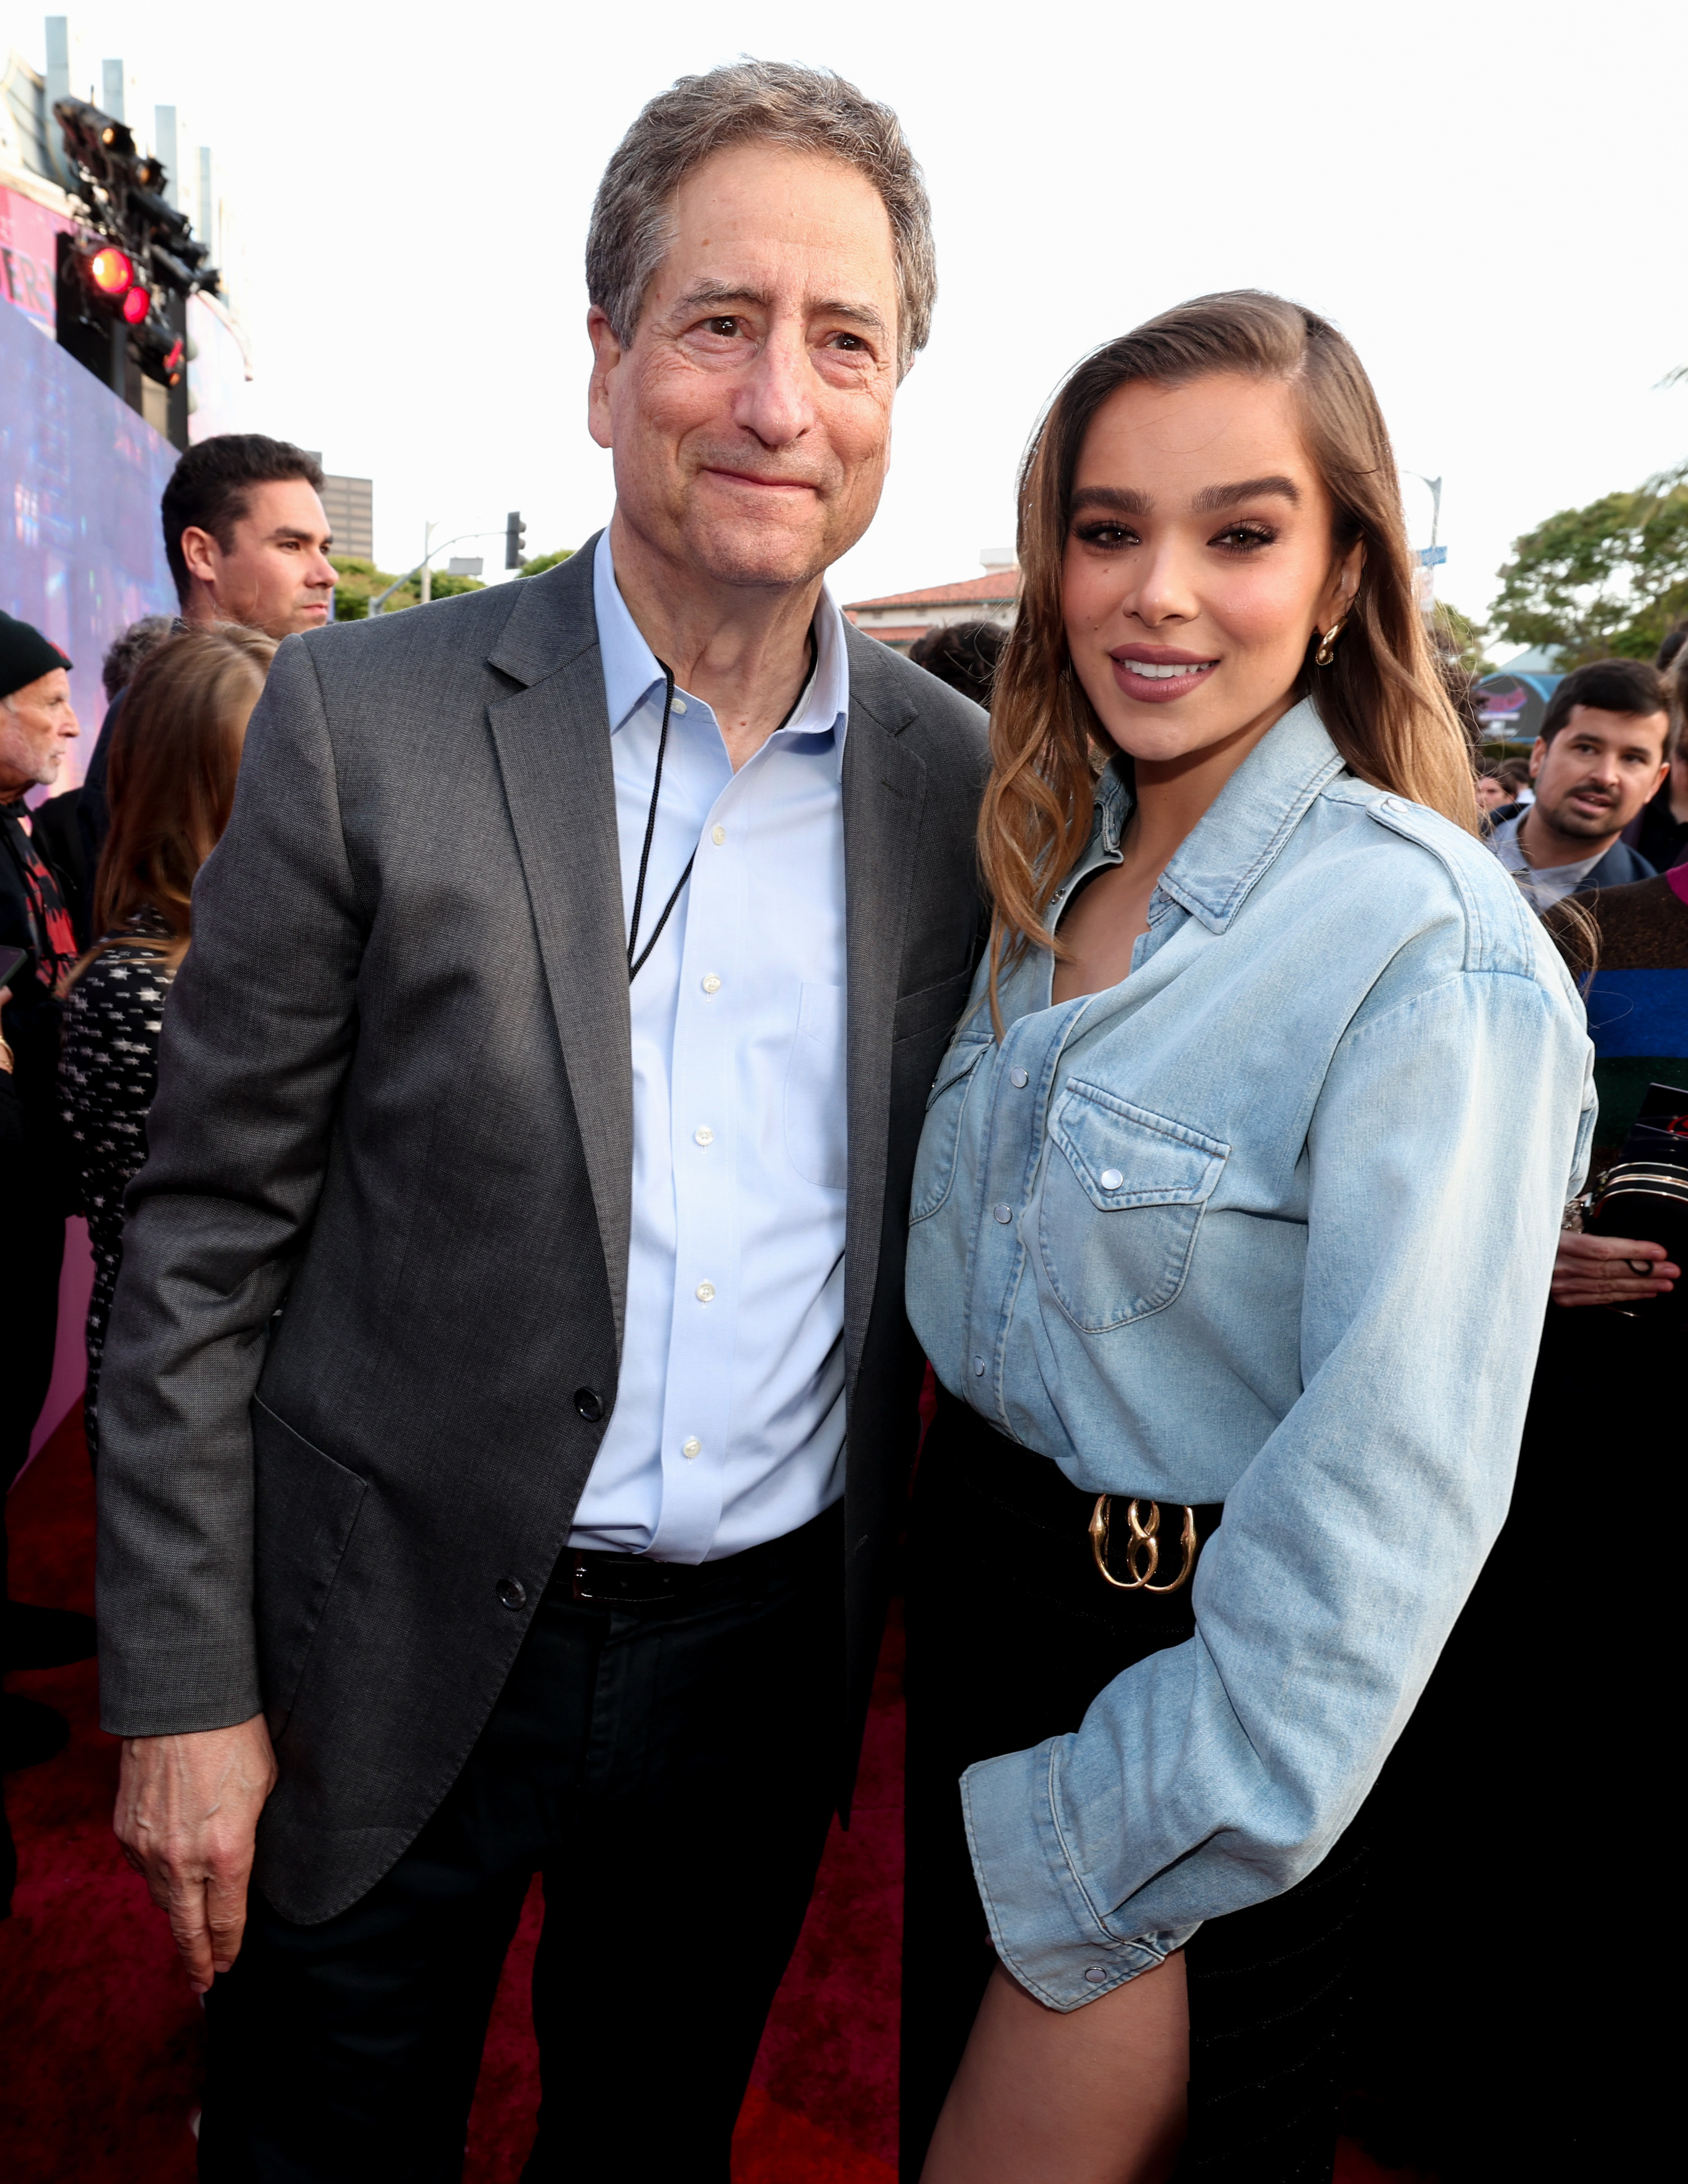 Tom Rothman poses for a picture with Hailee Steinfeld